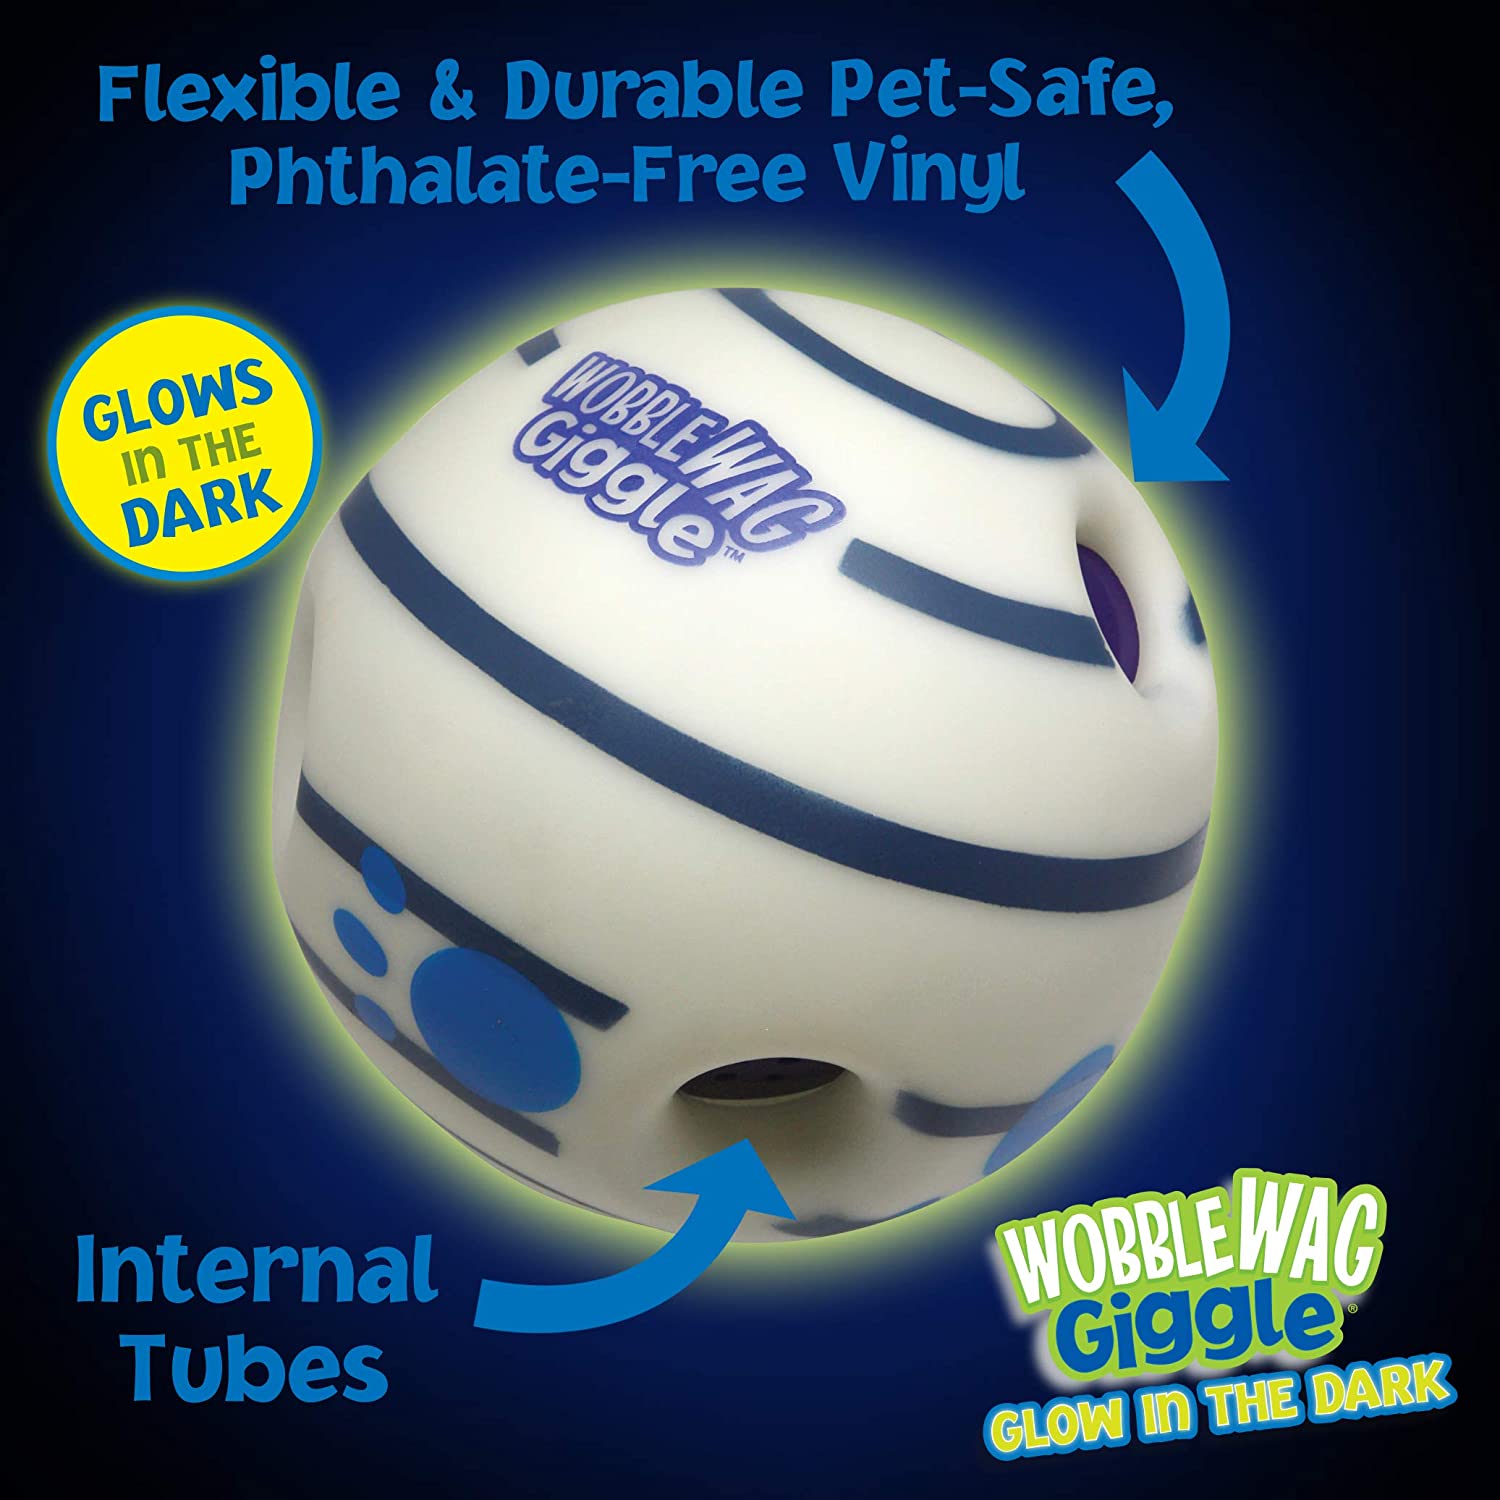 Wobble Giggle Ball - Interactive Dog Toy, Fun Giggle Sounds When Rolled or Shaken - BestBuddyStore